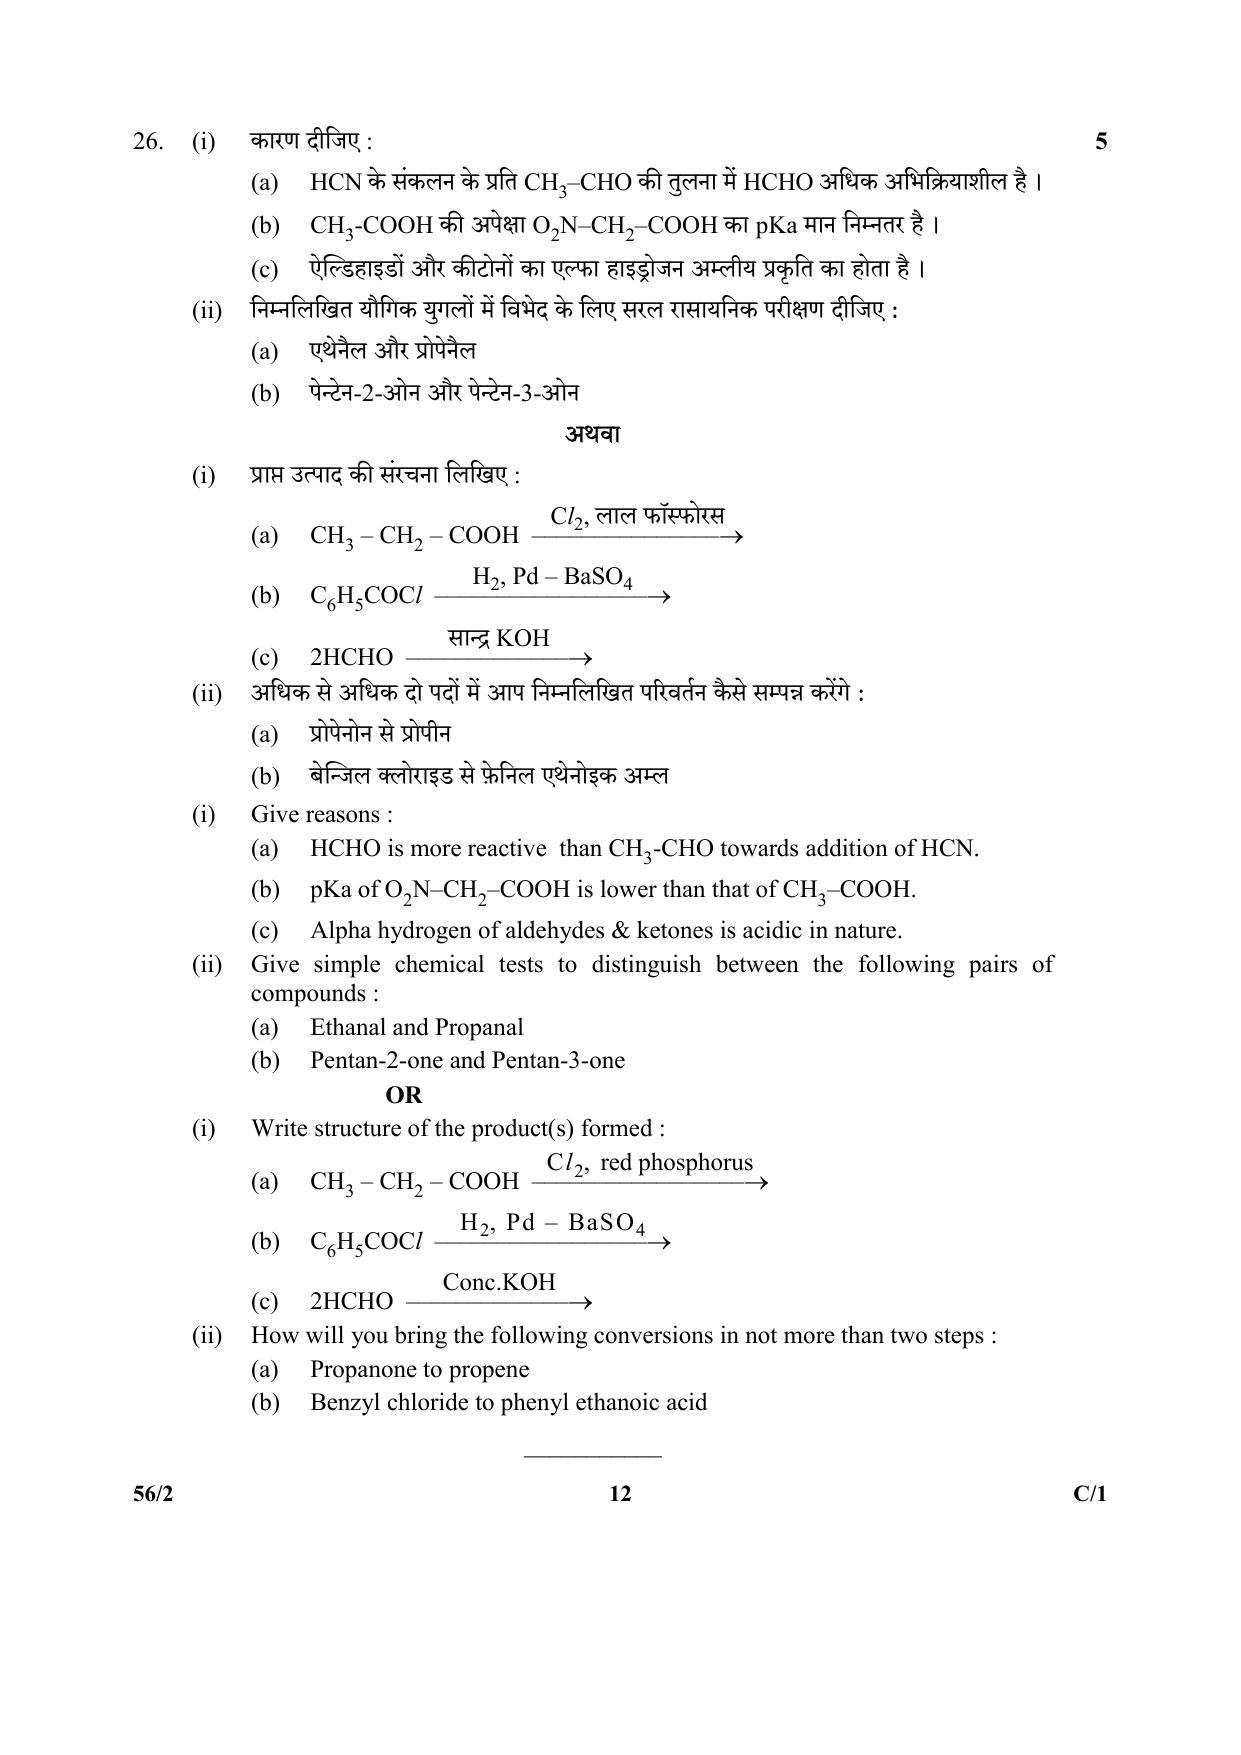 CBSE Class 12 56-2 (Chemistry) 2018 Compartment Question Paper - Page 12